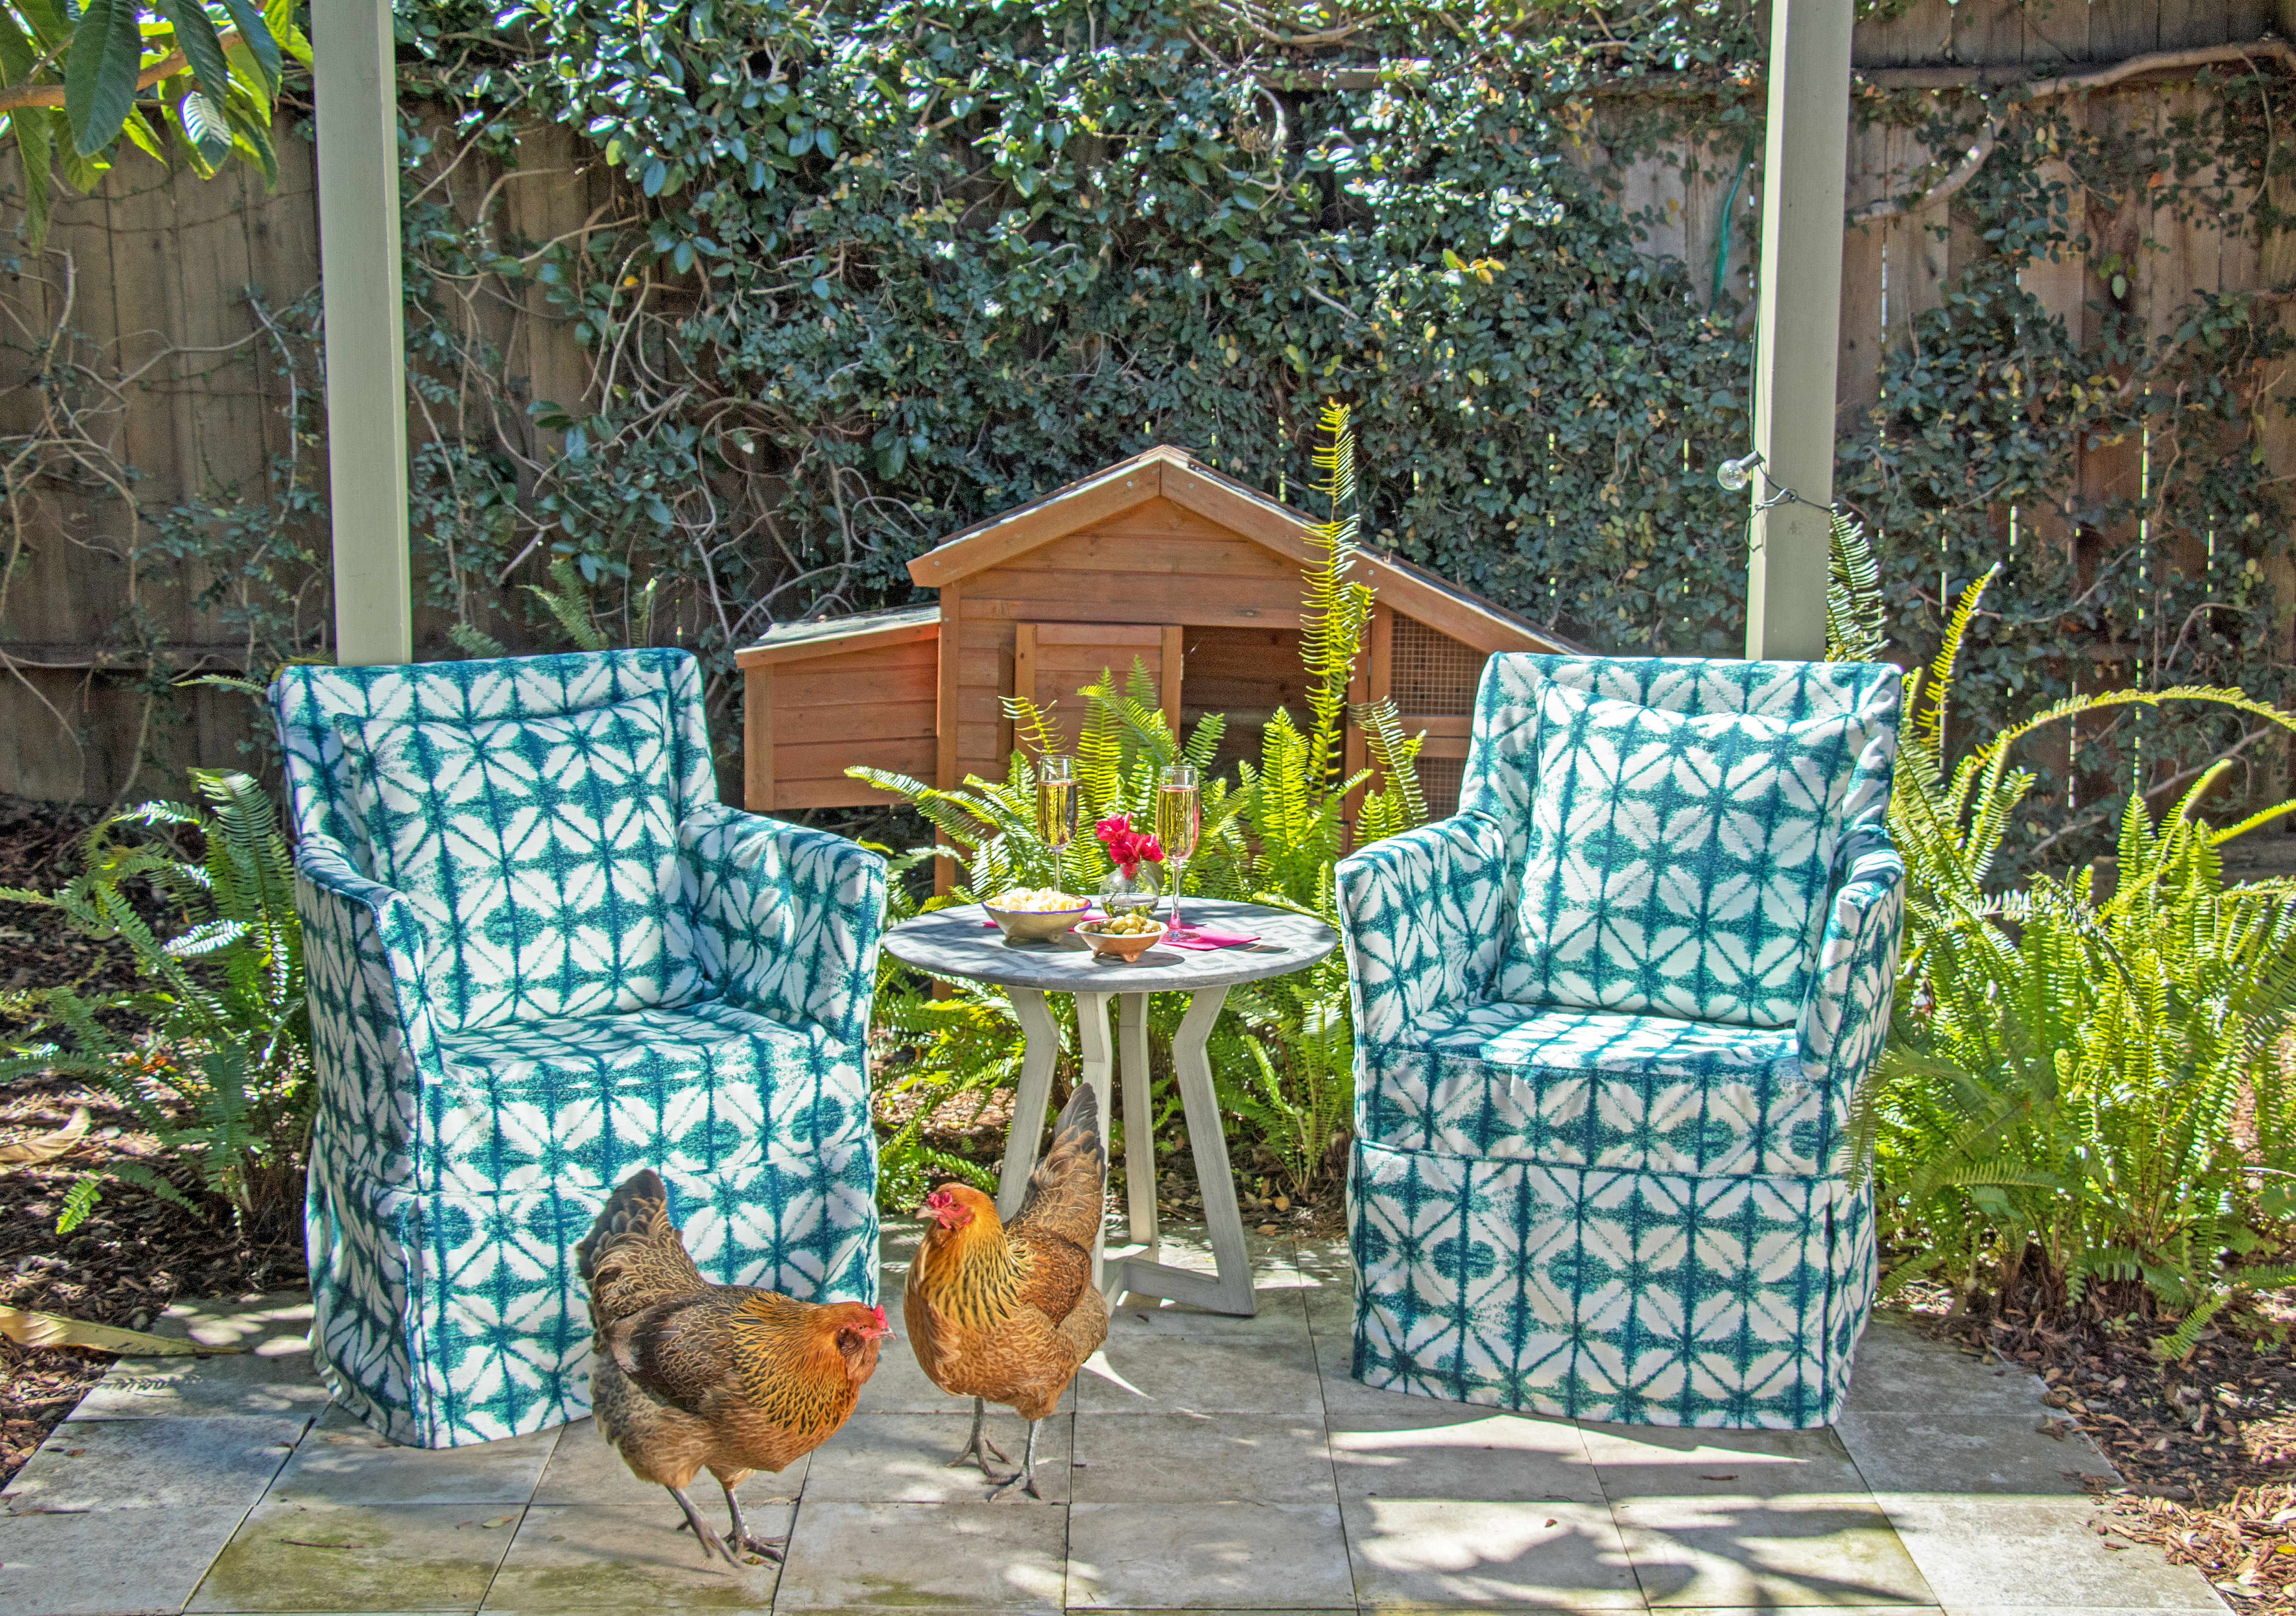 Personally, I love my backyard chickens --all the hipsters are doing it! But creating a space for any outdoor pets to roam is a must.